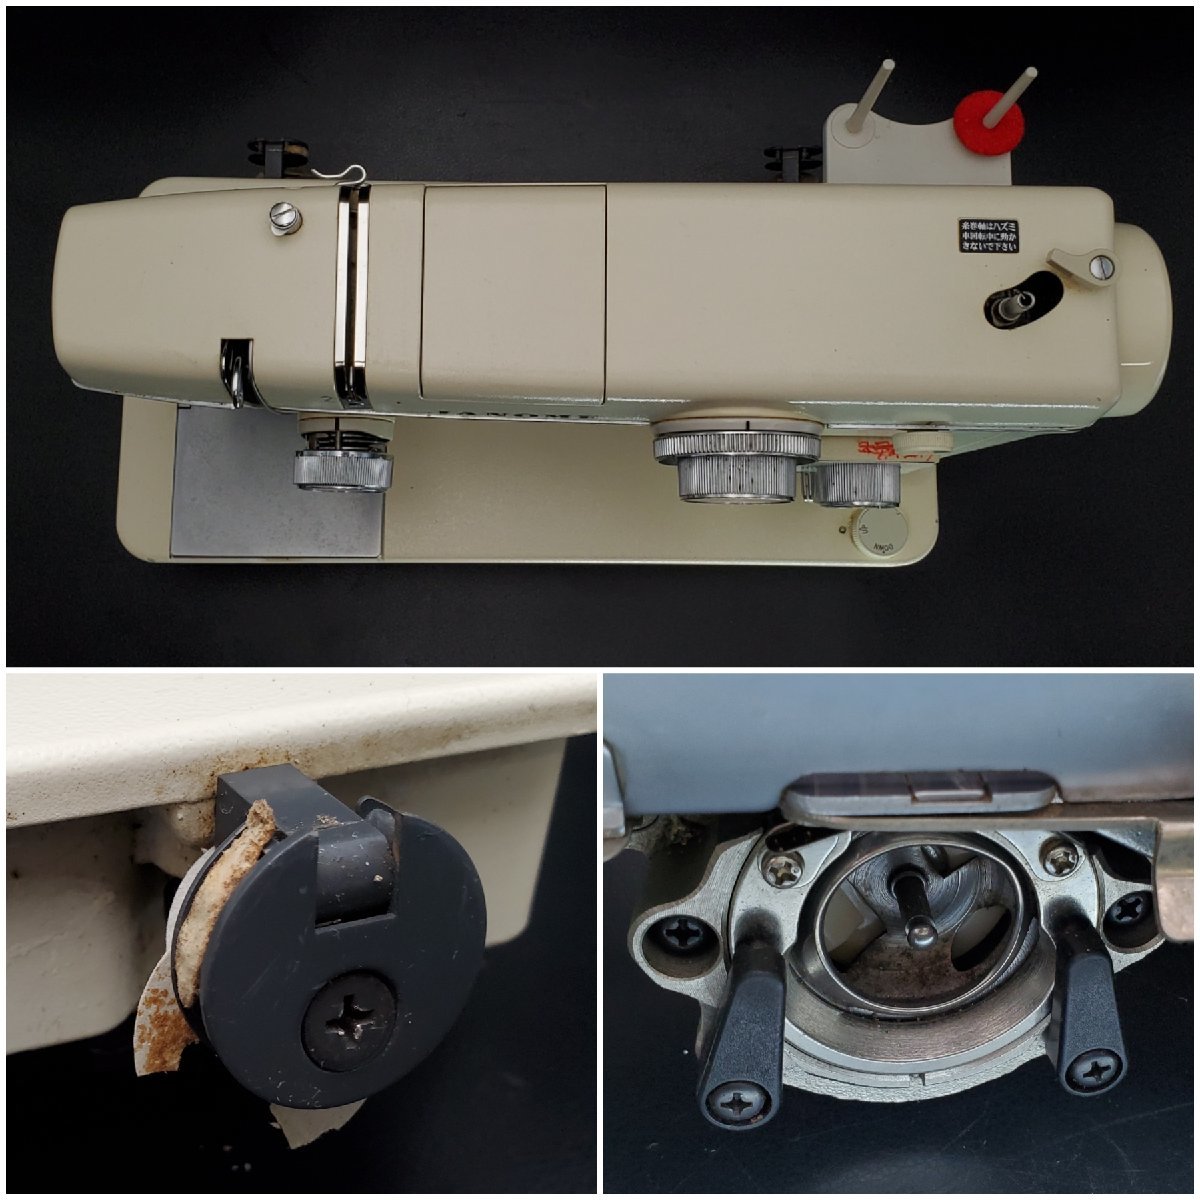 [. warehouse ] present condition goods JANOME Janome sewing machine MODEL 802to Piaa Ace body only sewing handicraft operation not yet verification junk 